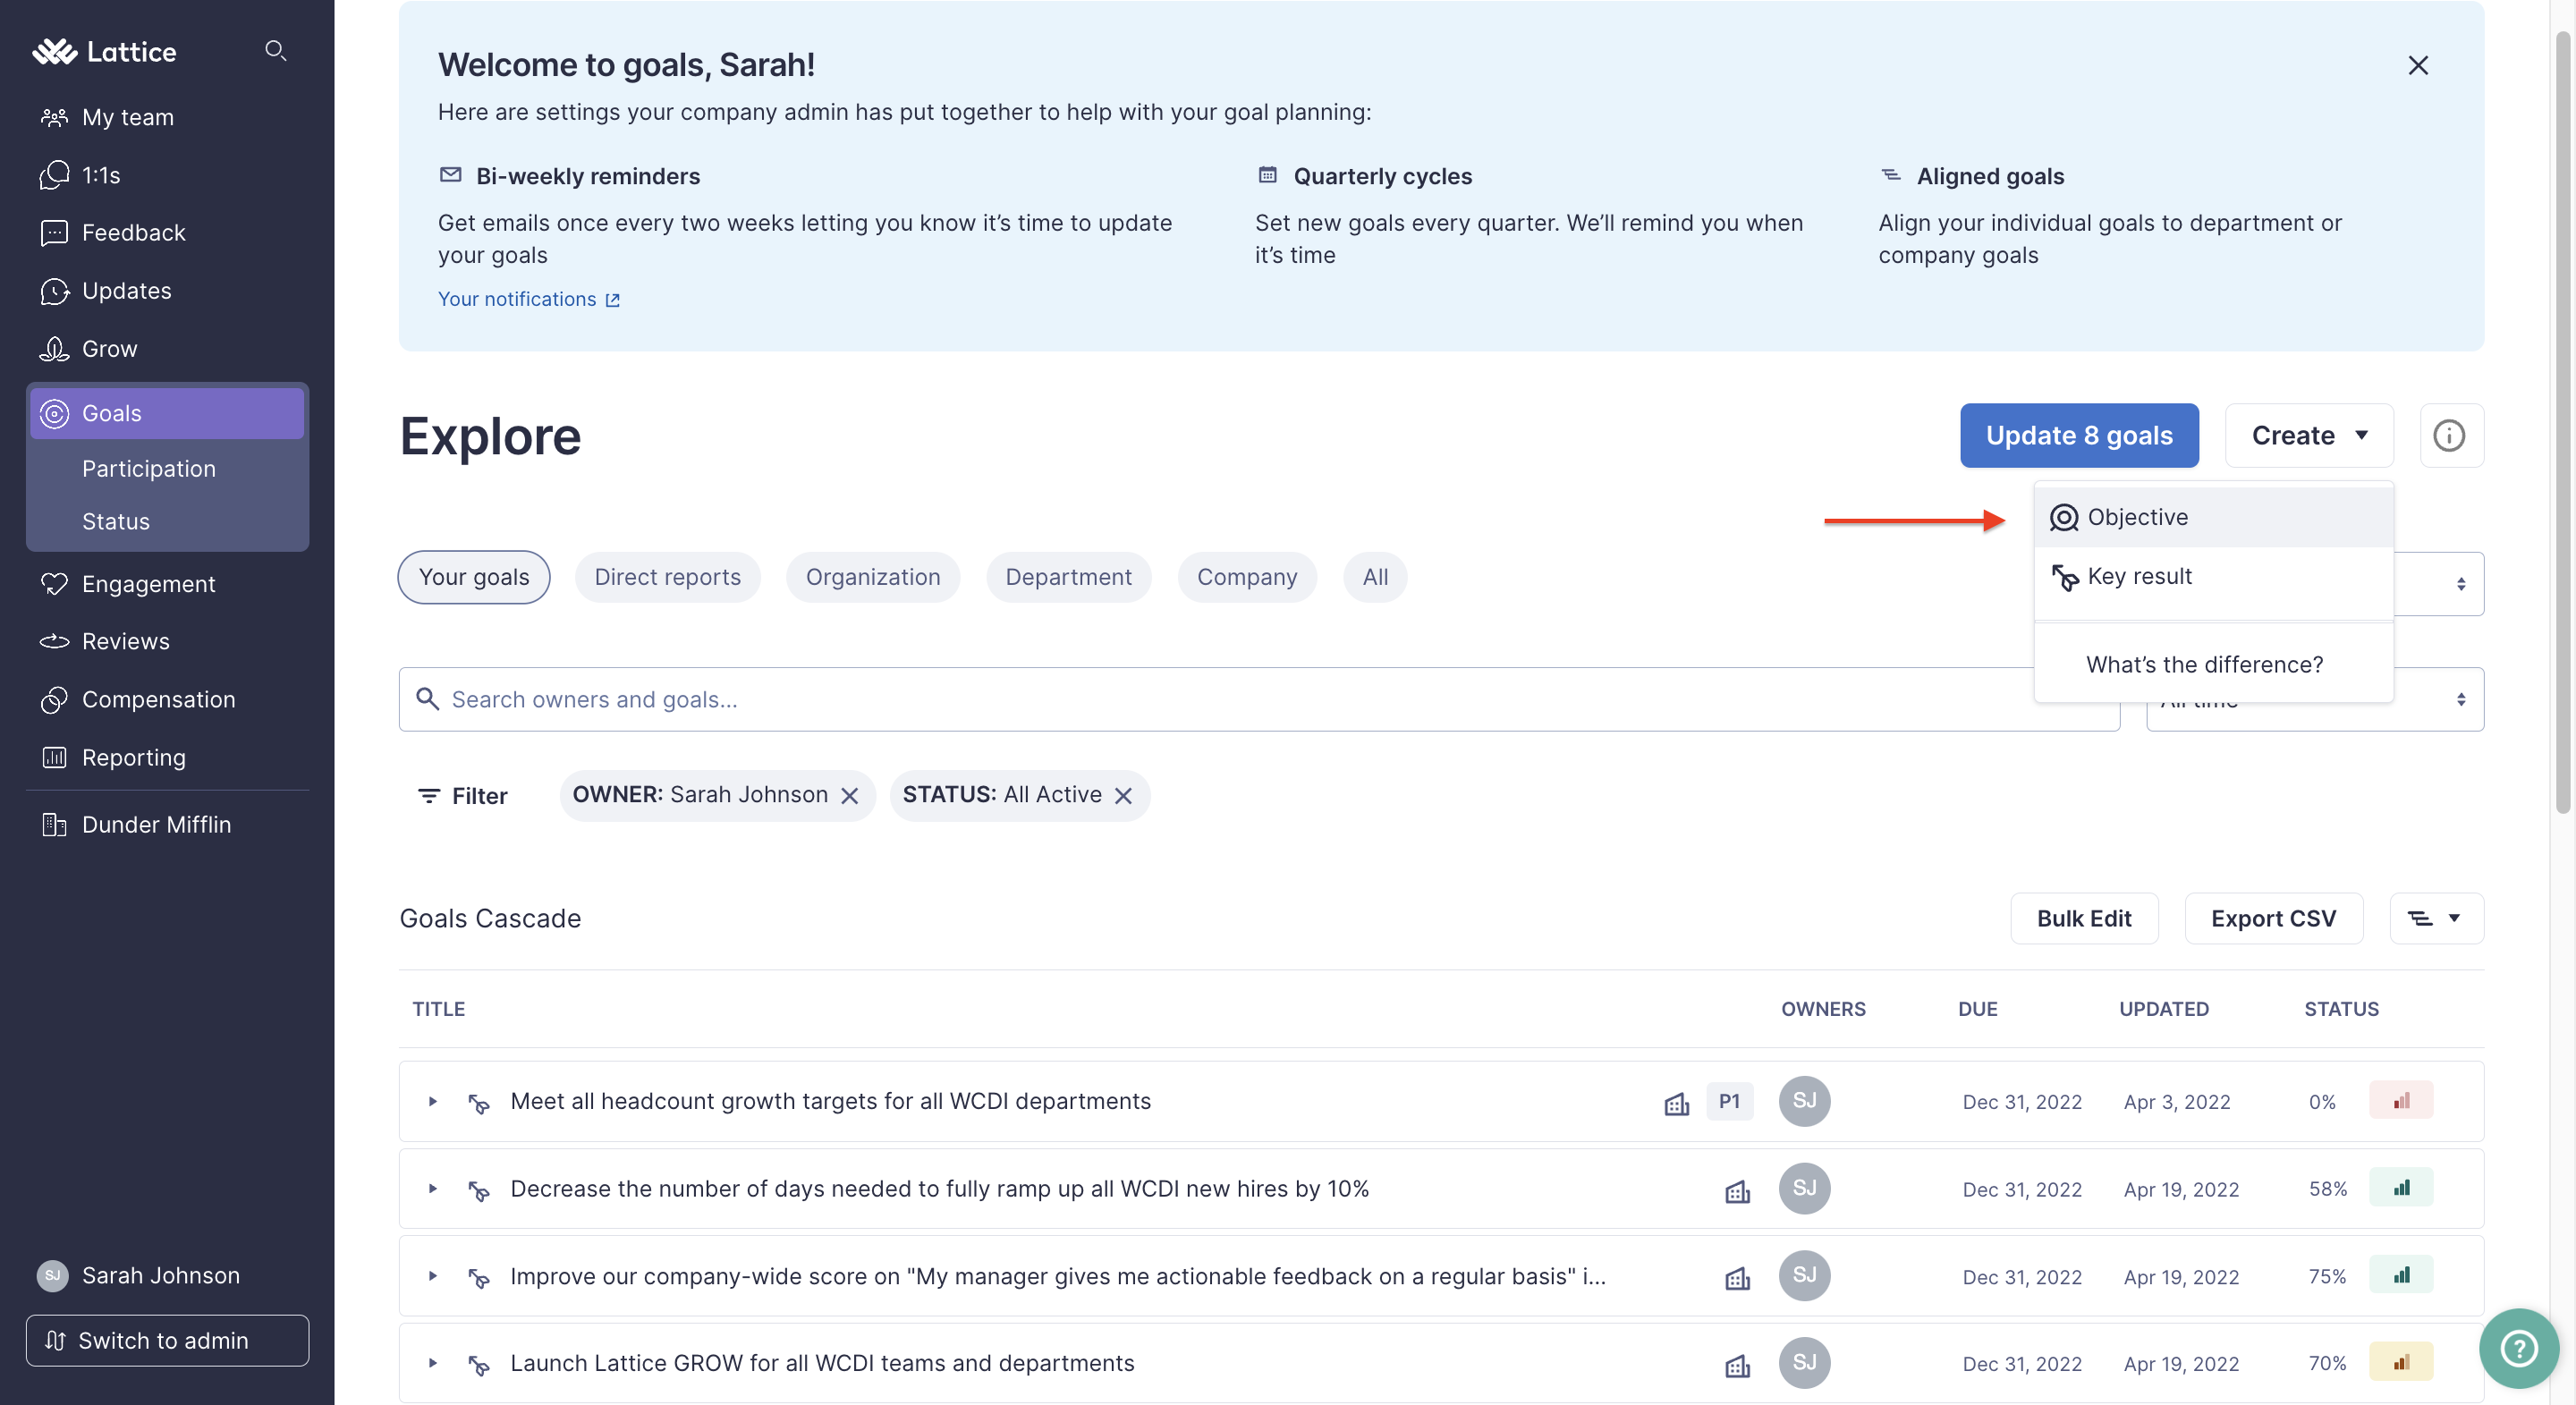 Goal Explore page. The Create dropdown is open. An arrow points to the Objective option. 